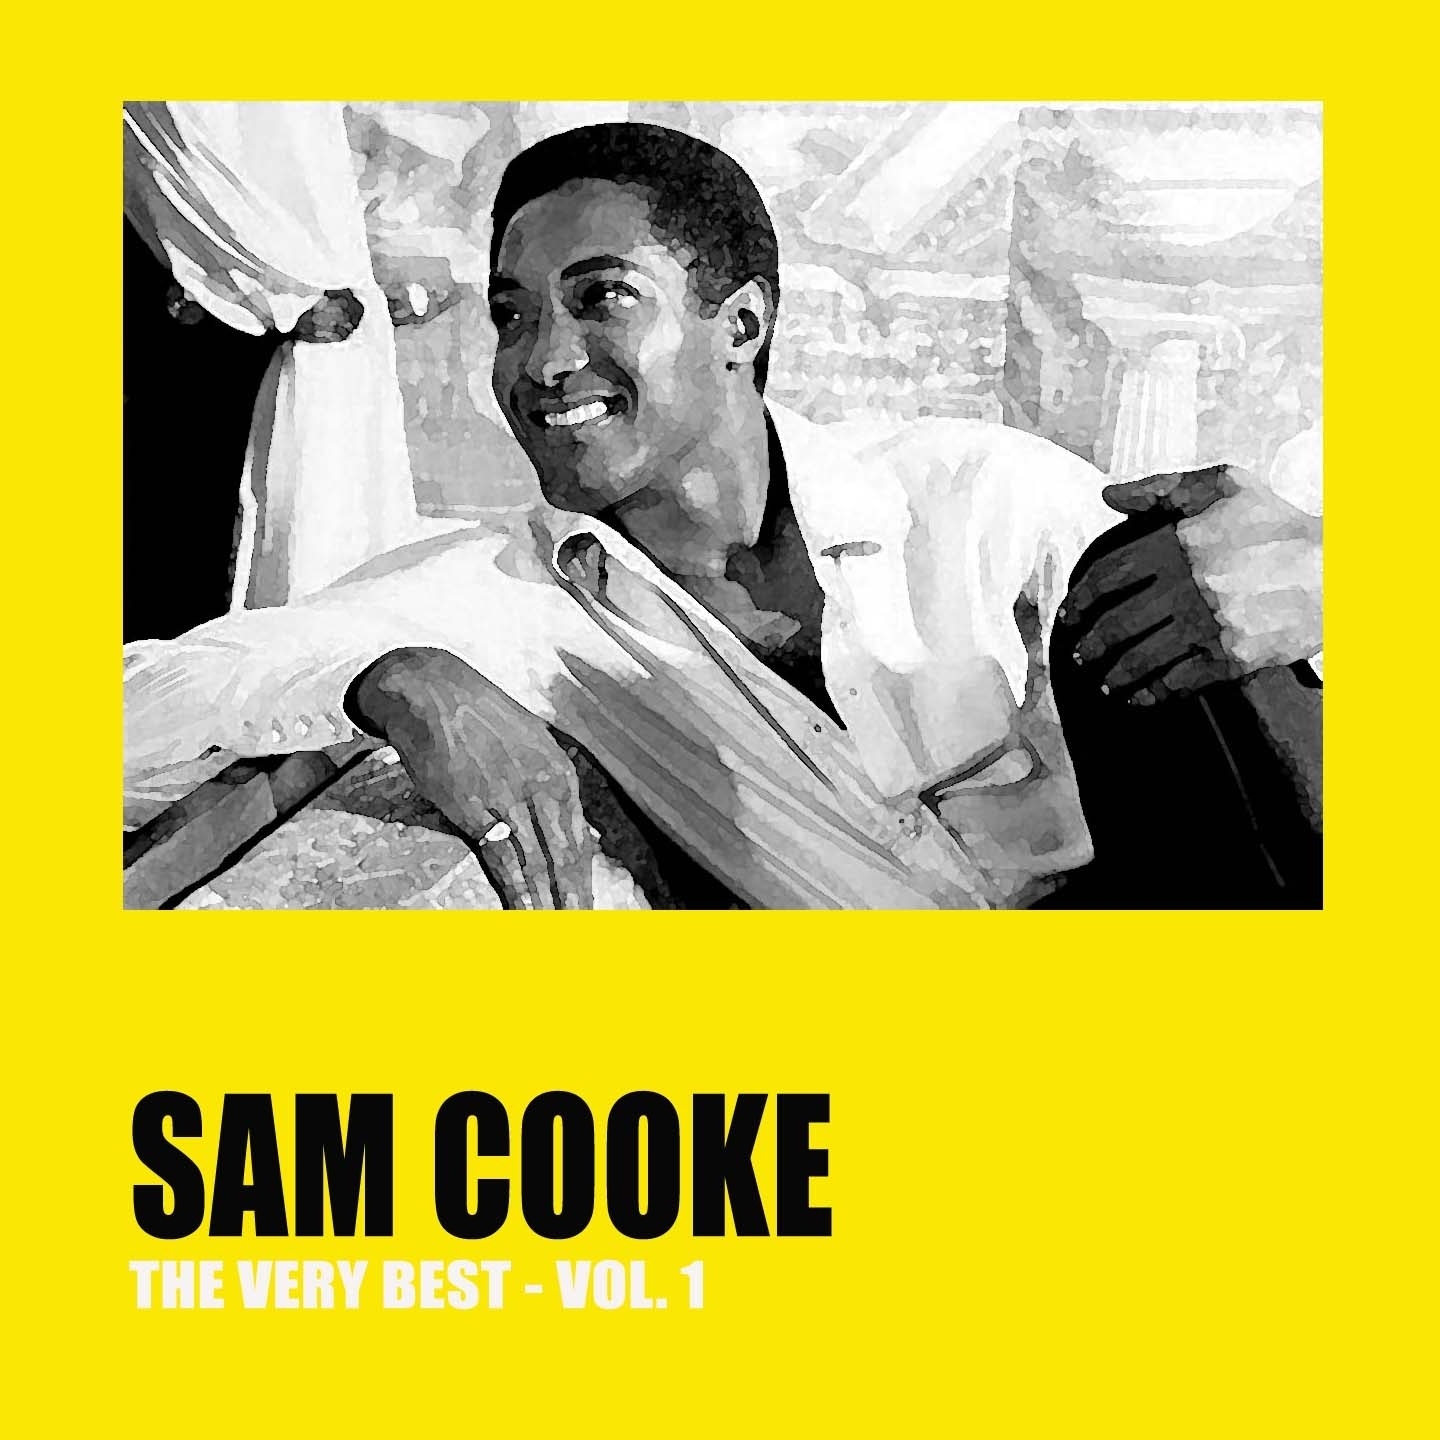 The Very Best of Sam Cooke, Vol. 1